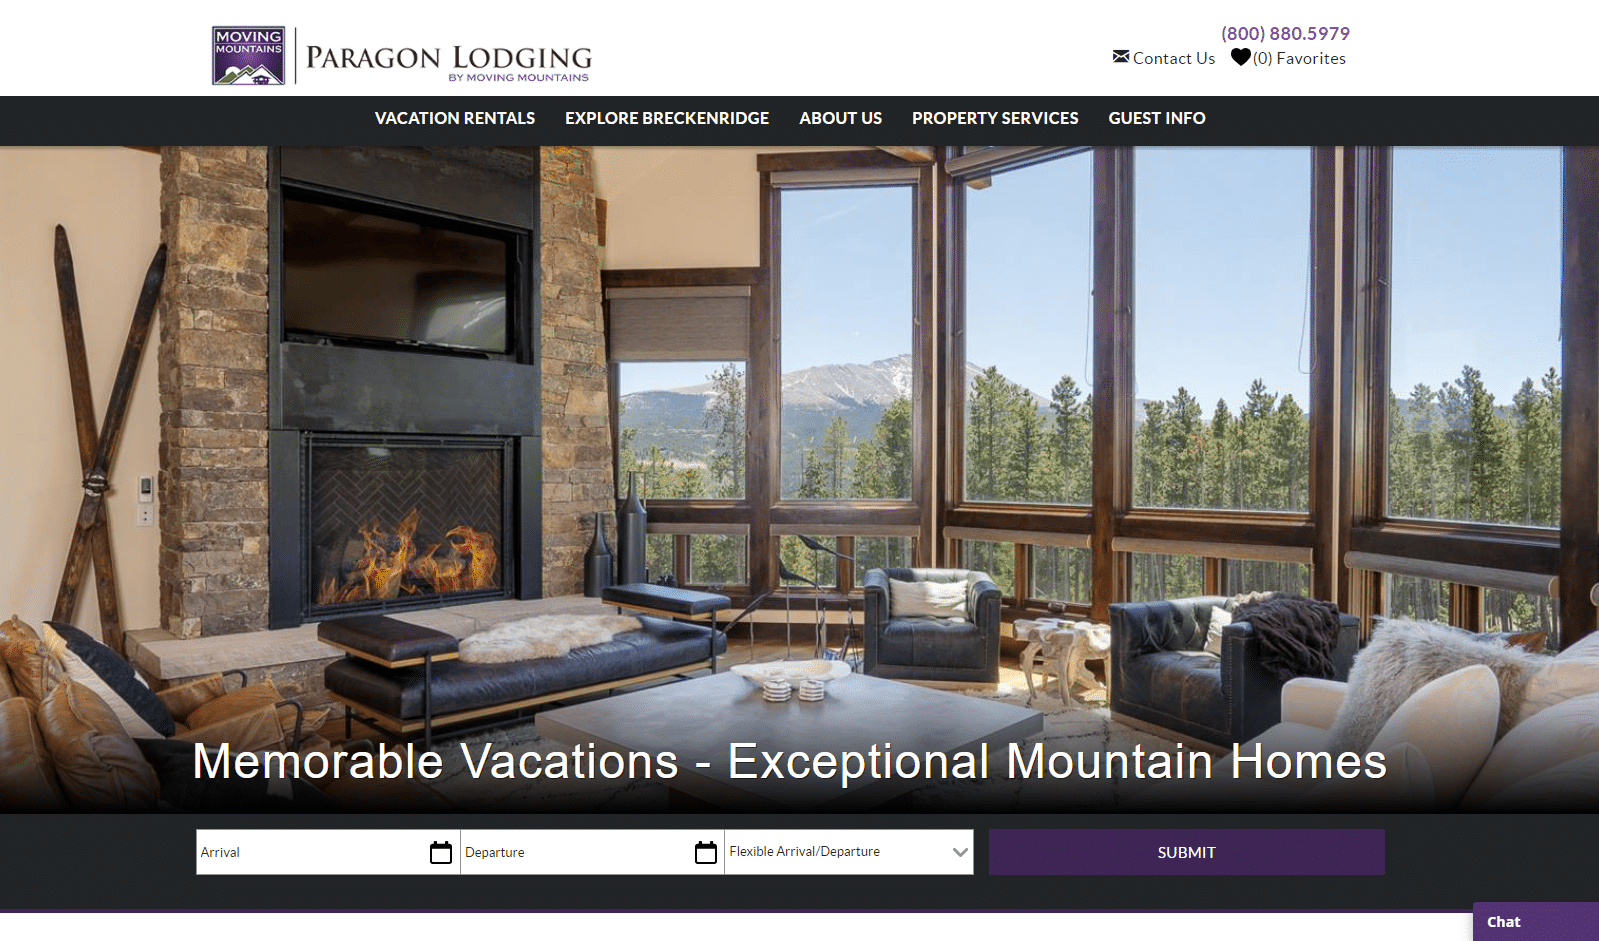 Moving Mountains Acquires Paragon Lodging in Breckenridge